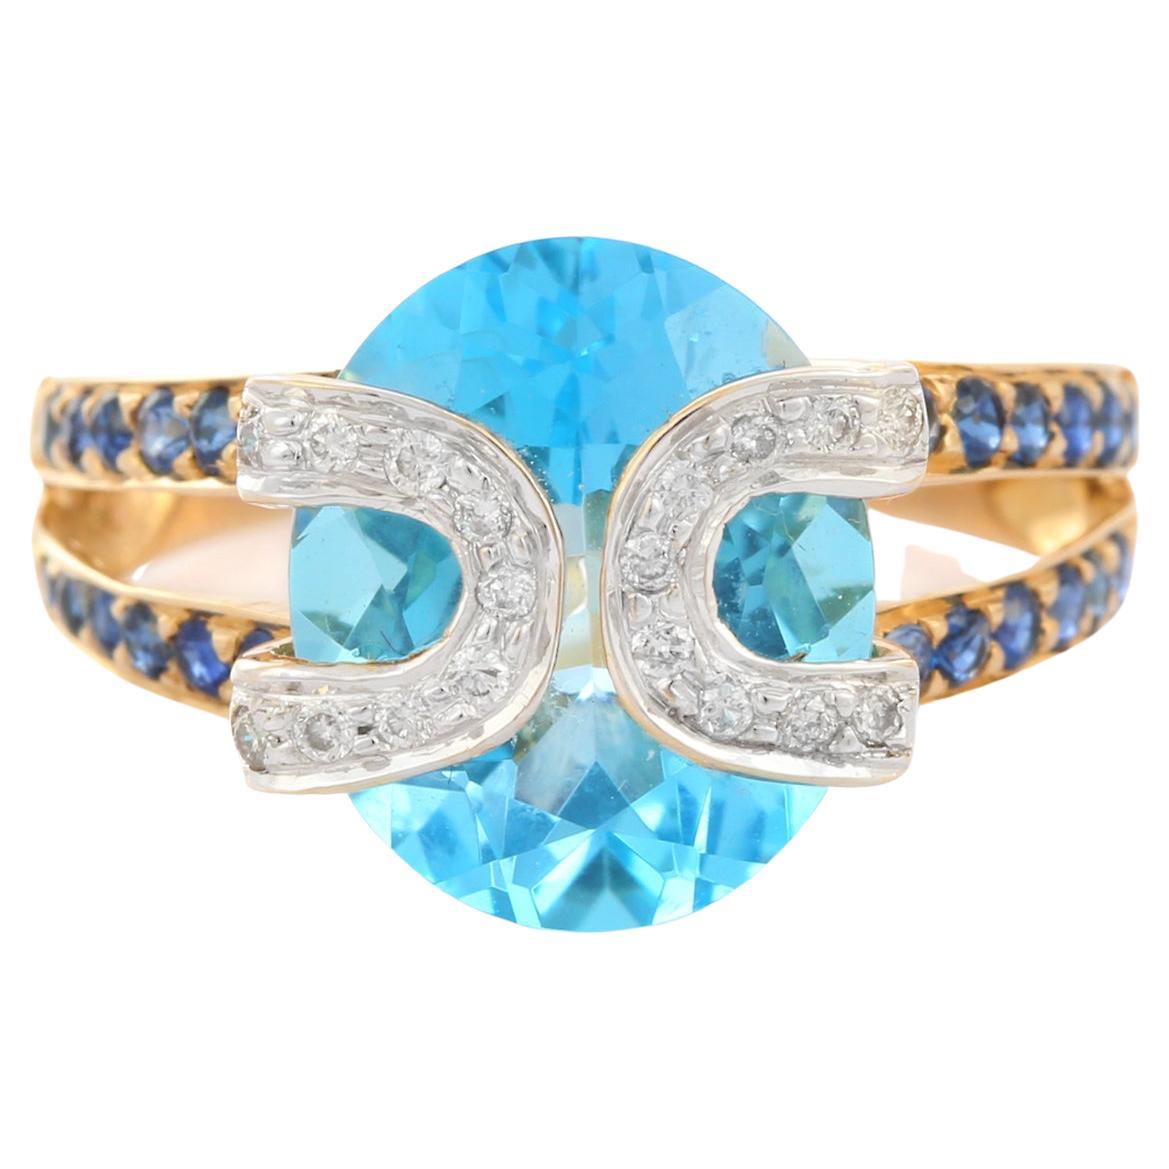 18K Yellow Gold Designer Blue Topaz Cocktail Ring with Sapphire and Diamonds